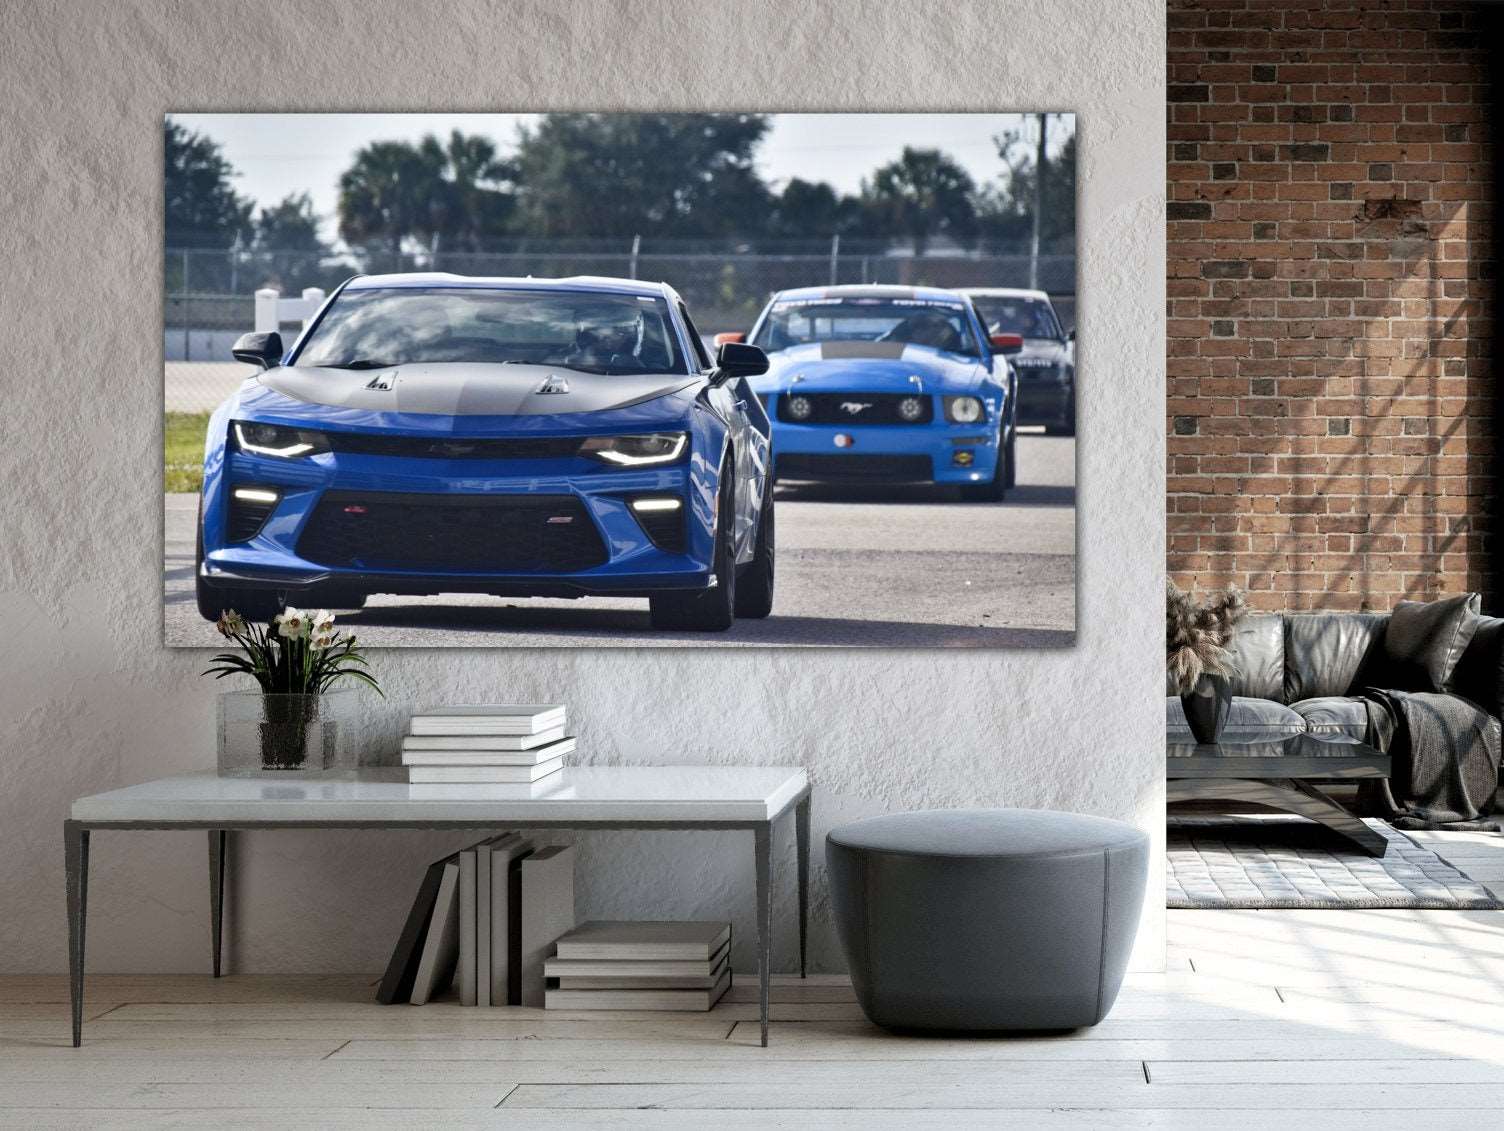 Camaro and Mustang Heading for Track - Classic Metal Print